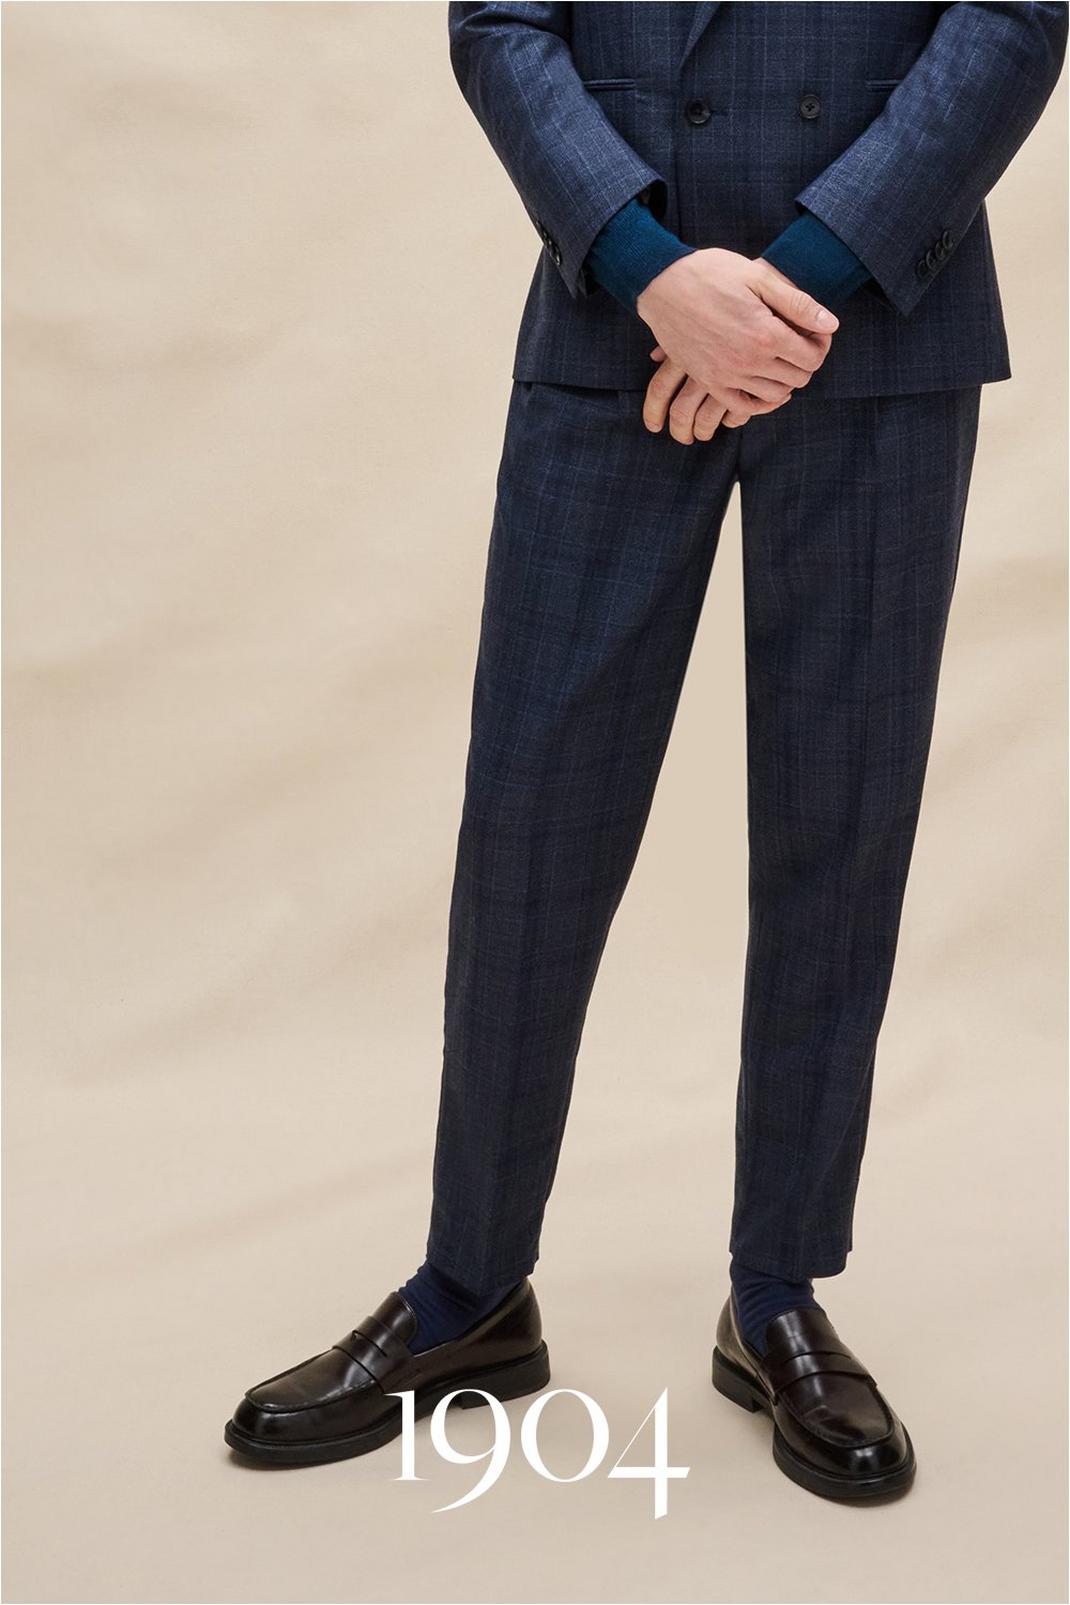 1904 Tapered Fit Navy Tonal Check Suit Trouser image number 1